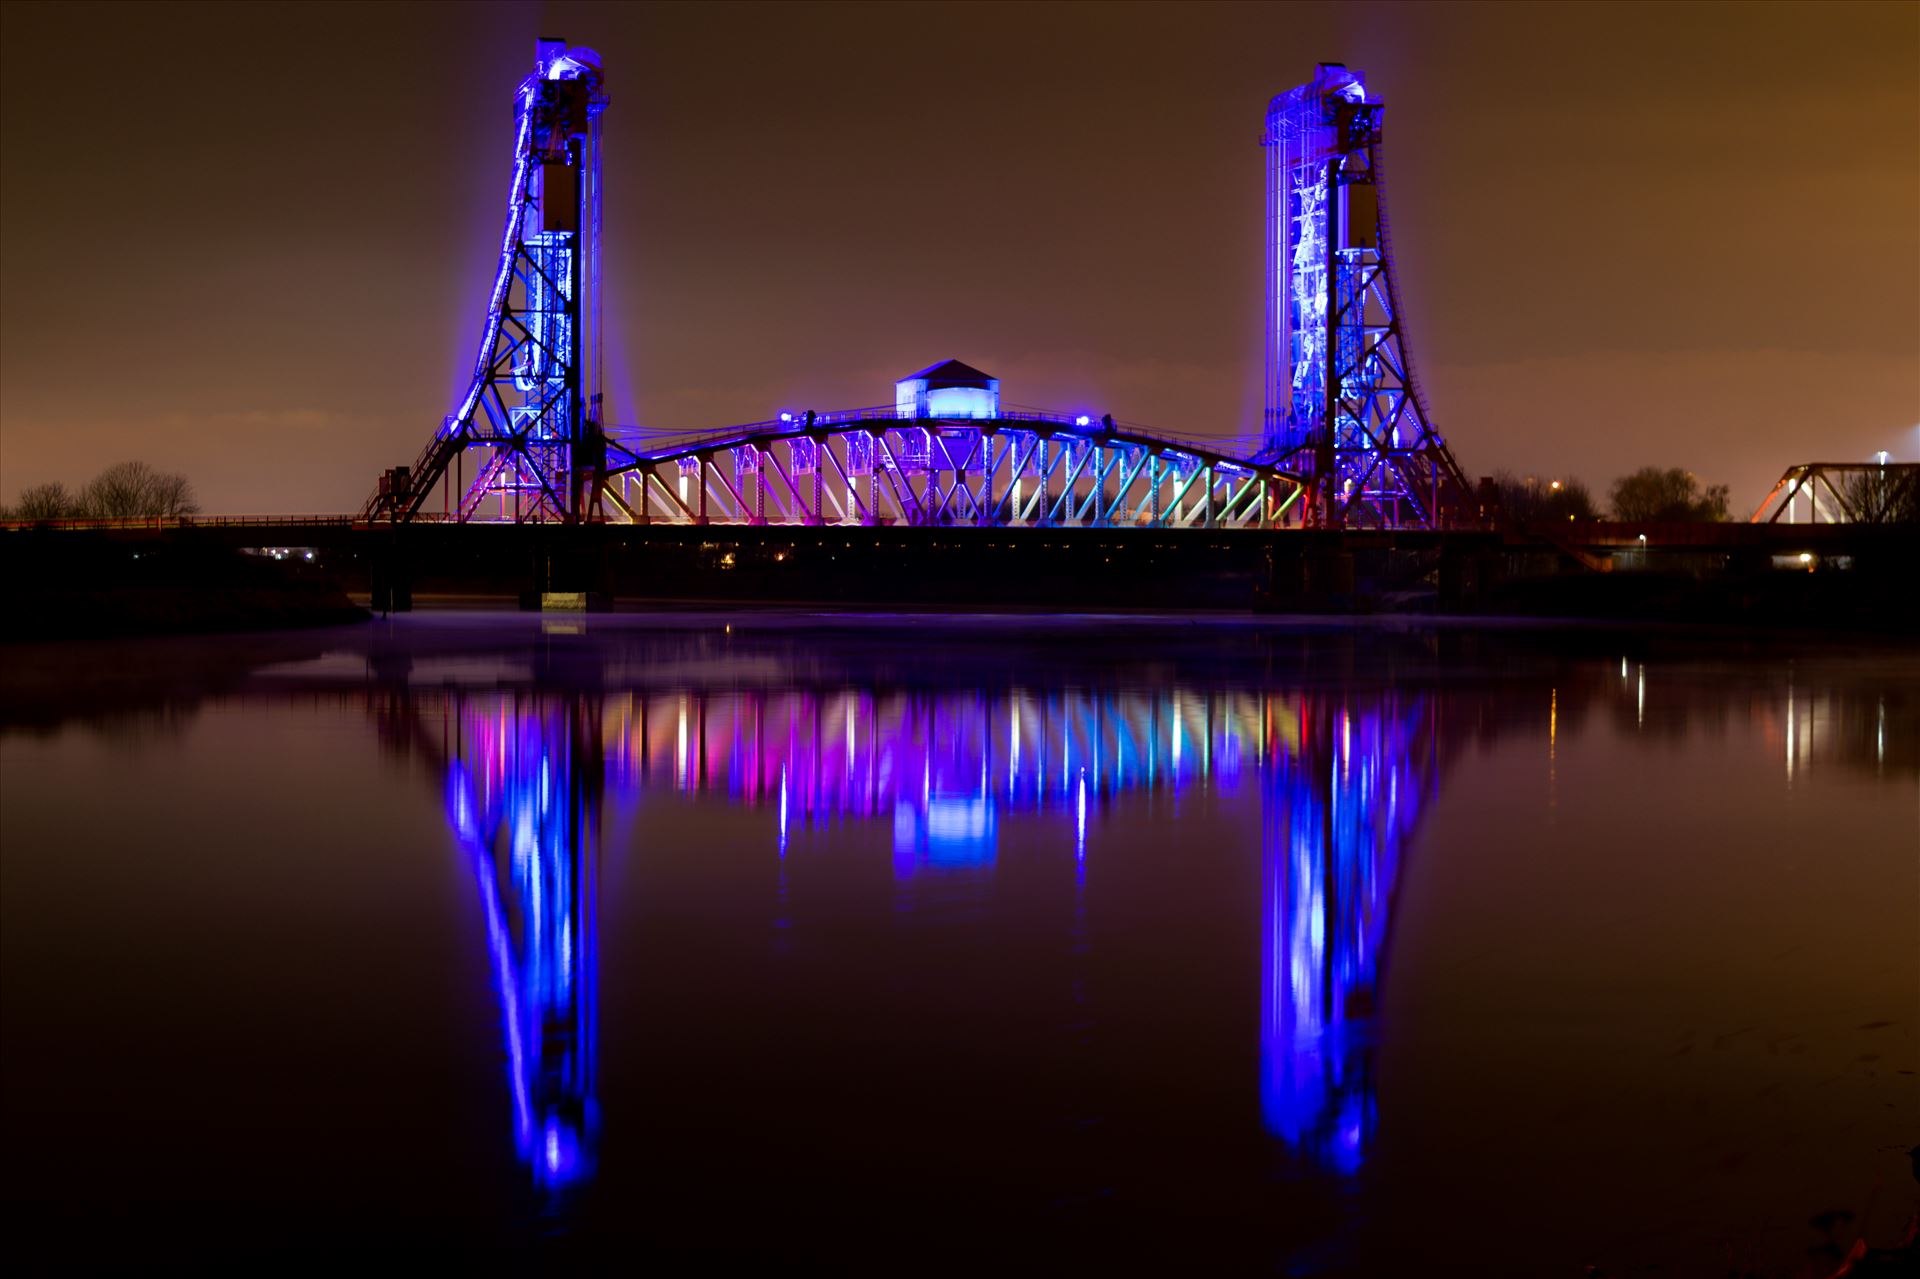 Newport Bridge Rainbow Lights Reflection Taken boxing night down by the river Tees, Newport bridge with the reflection looked amazing by AJ Stoves Photography